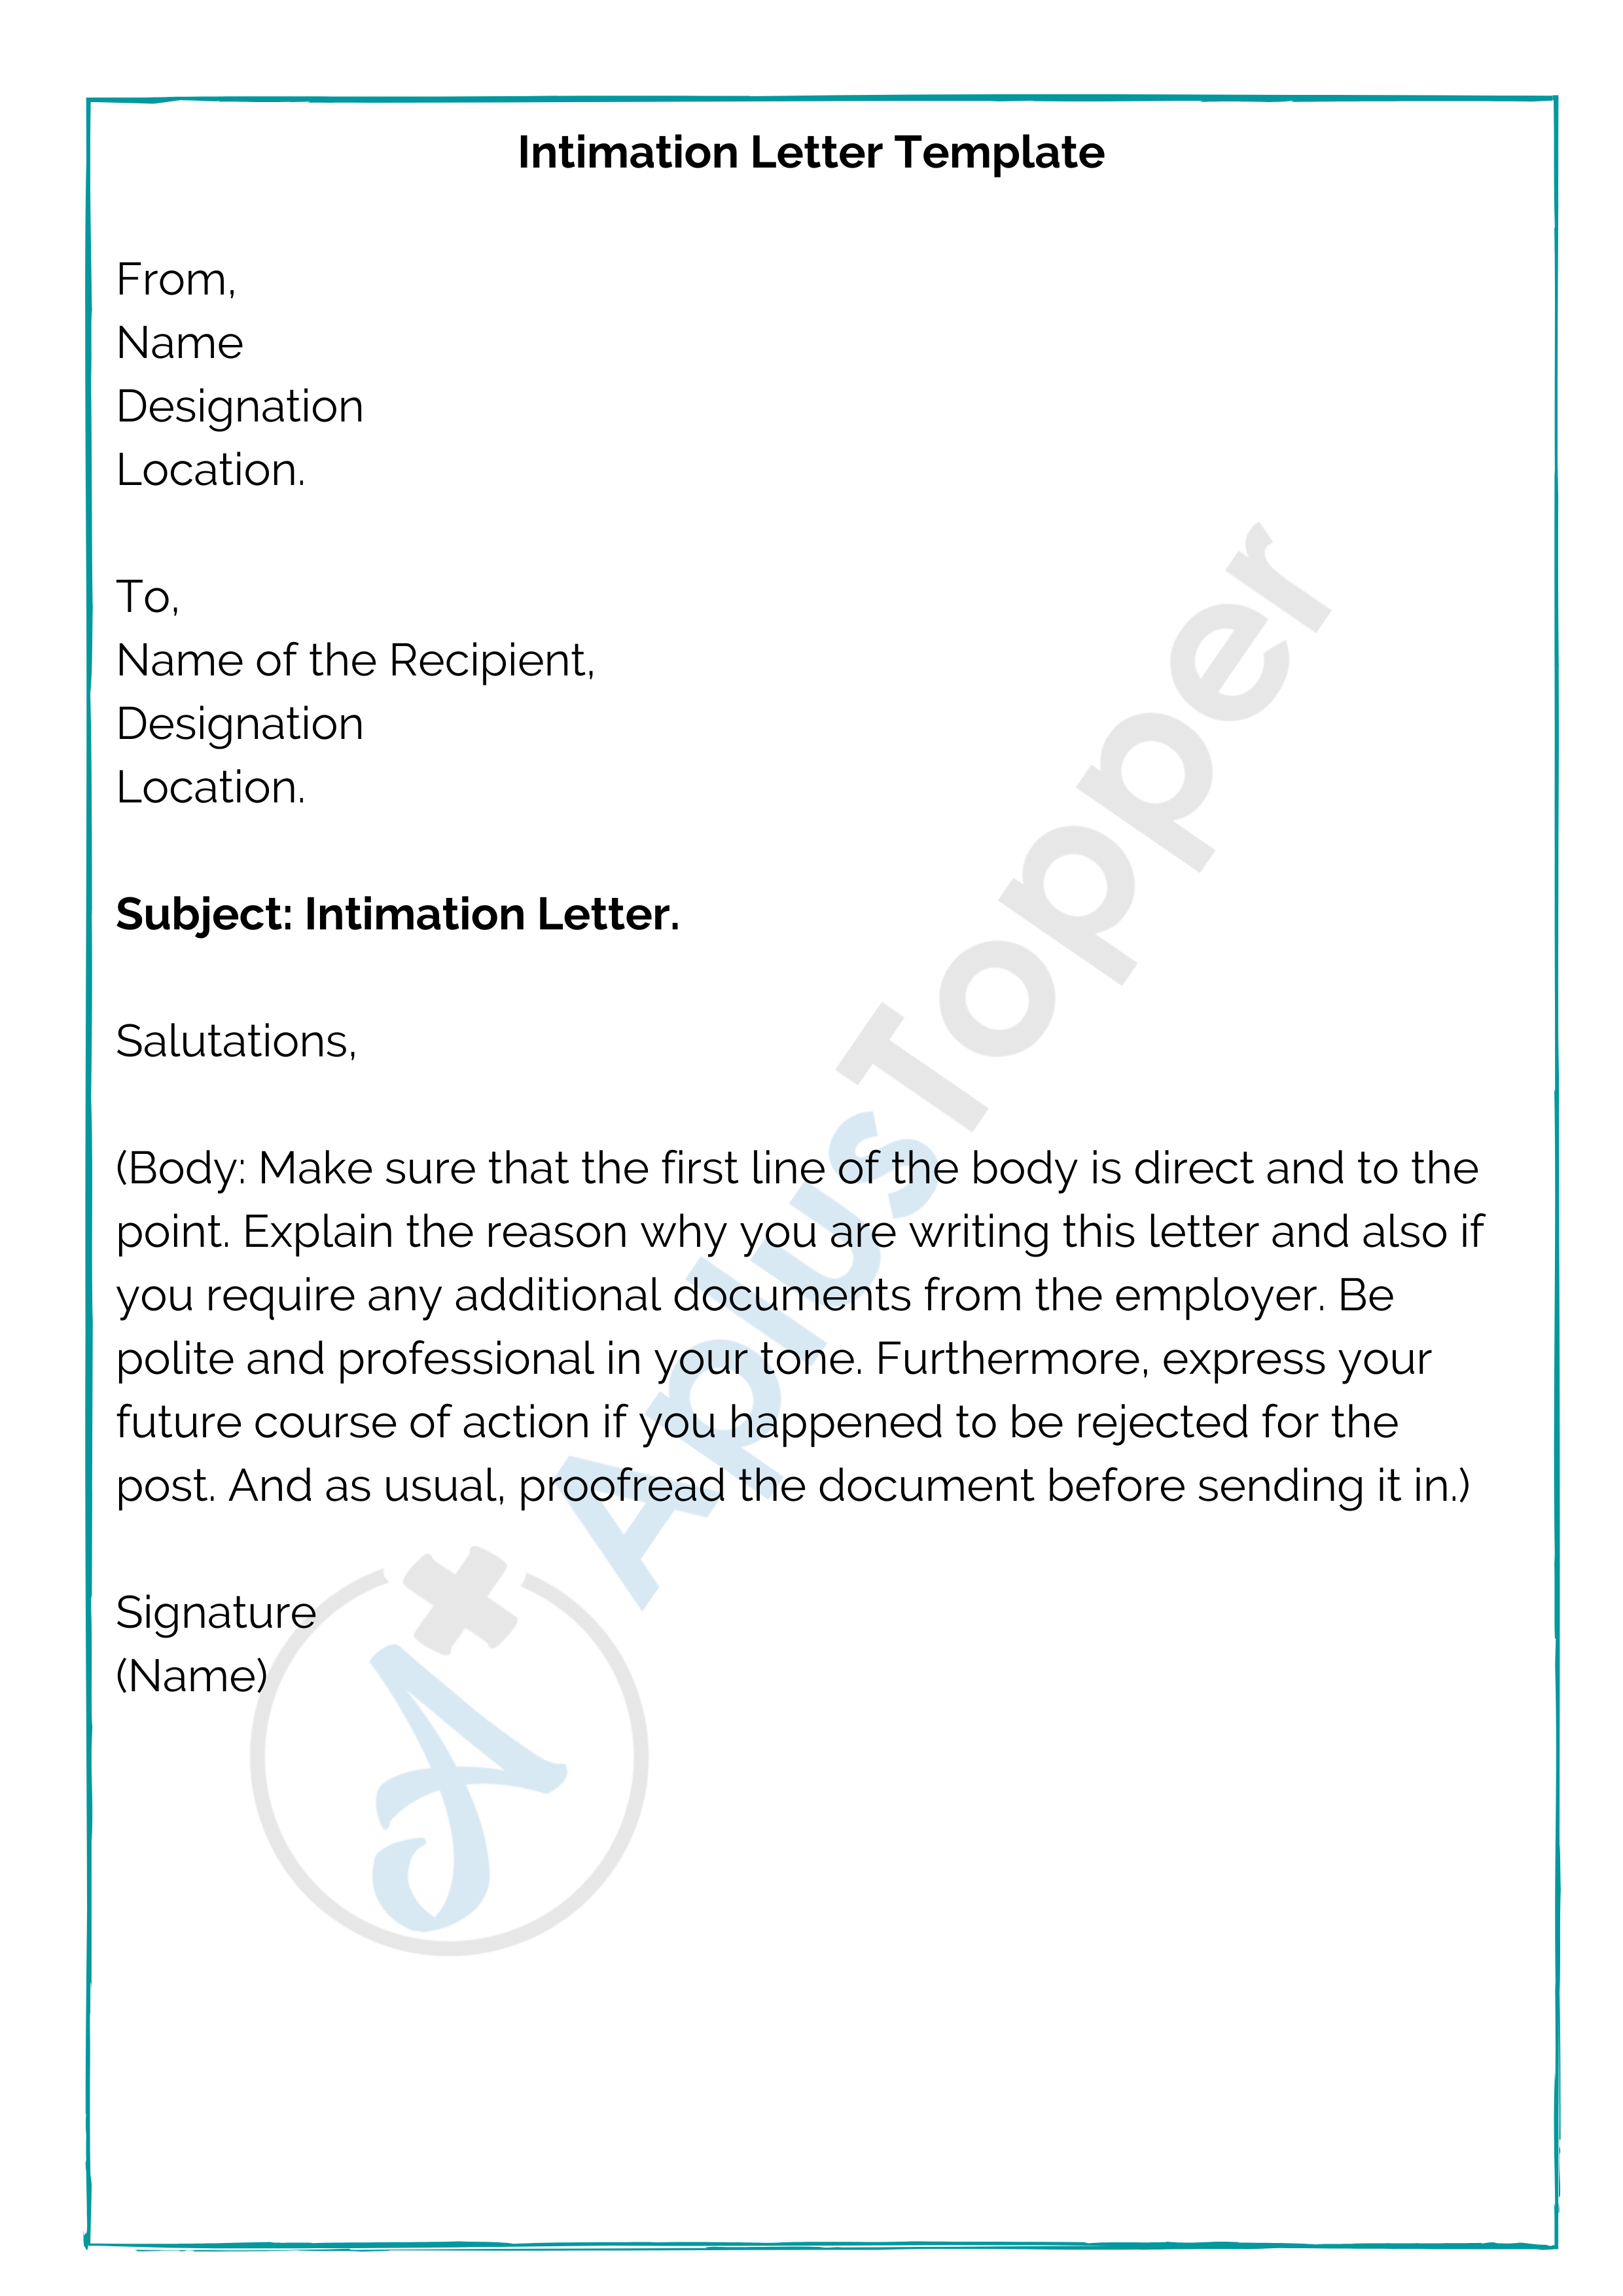 Intimation Letter Template